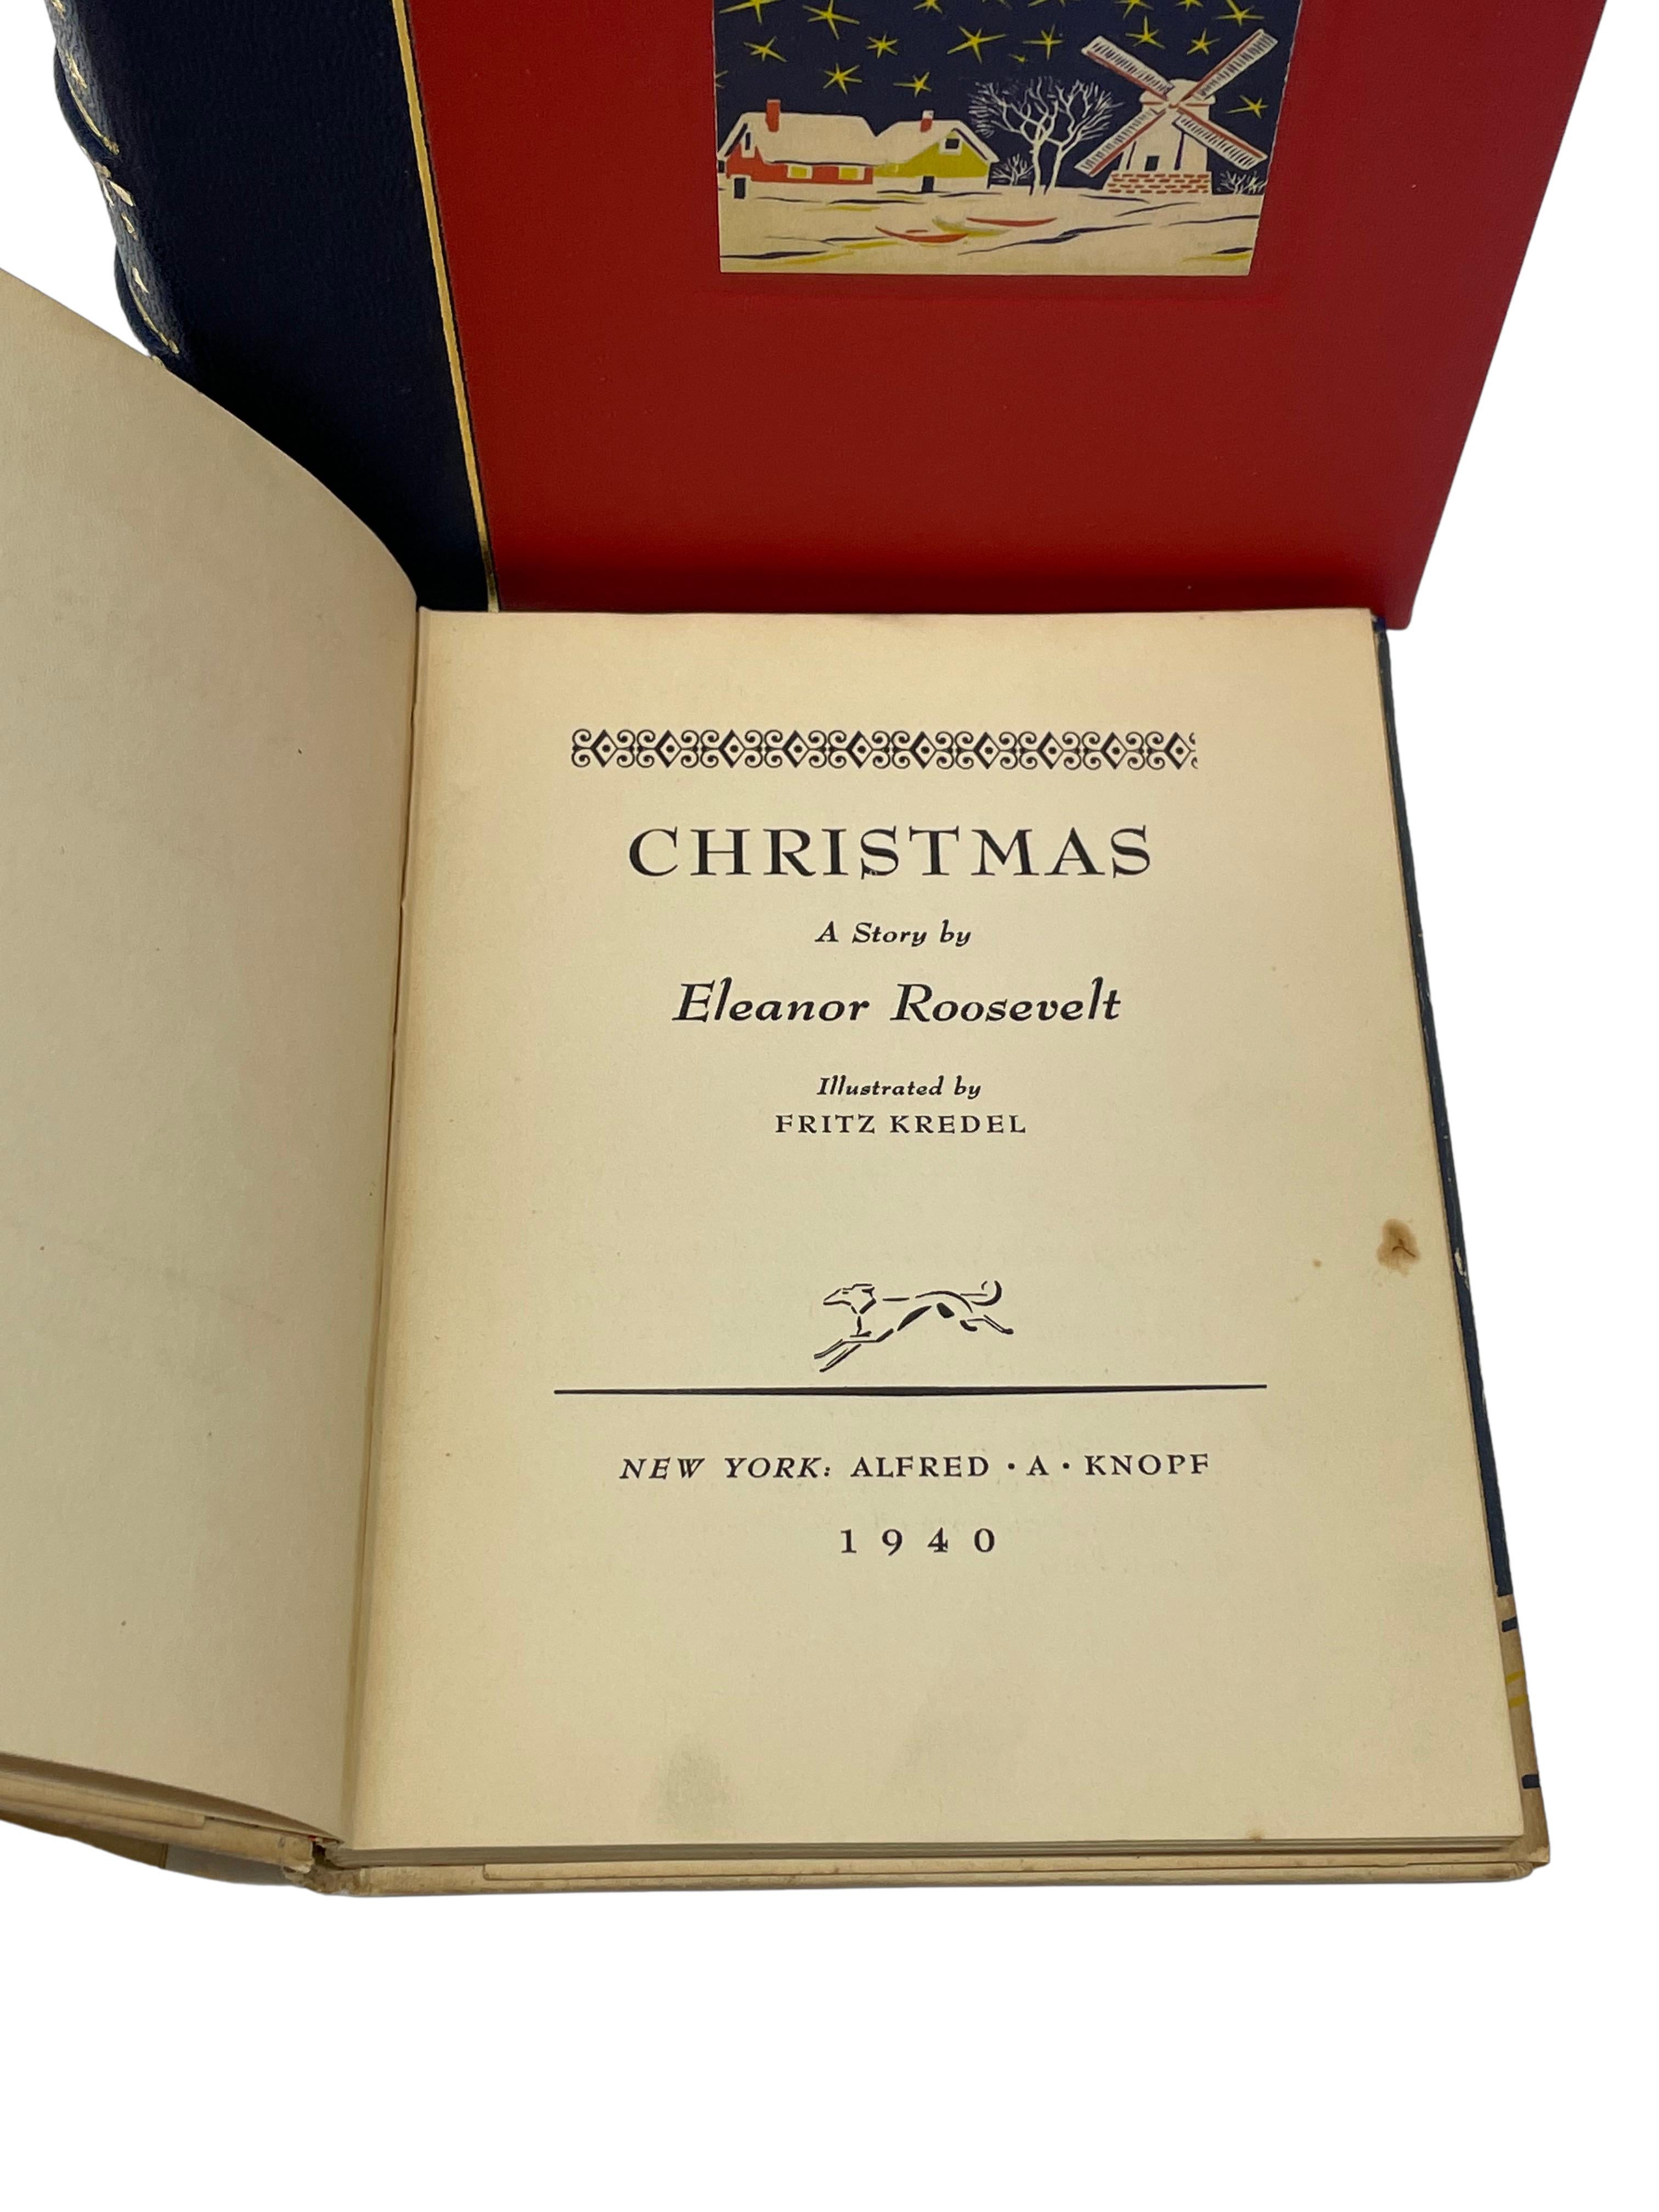 Roosevelt, Eleanor. Christmas: A Story. New York: Alfred A. Knopf: 1940. First Edition. Signed by Roosevelt. Twelvemo, in its colorful original dust jacket. Presented with a custom archival clamshell. 

This is a beautiful first edition printing